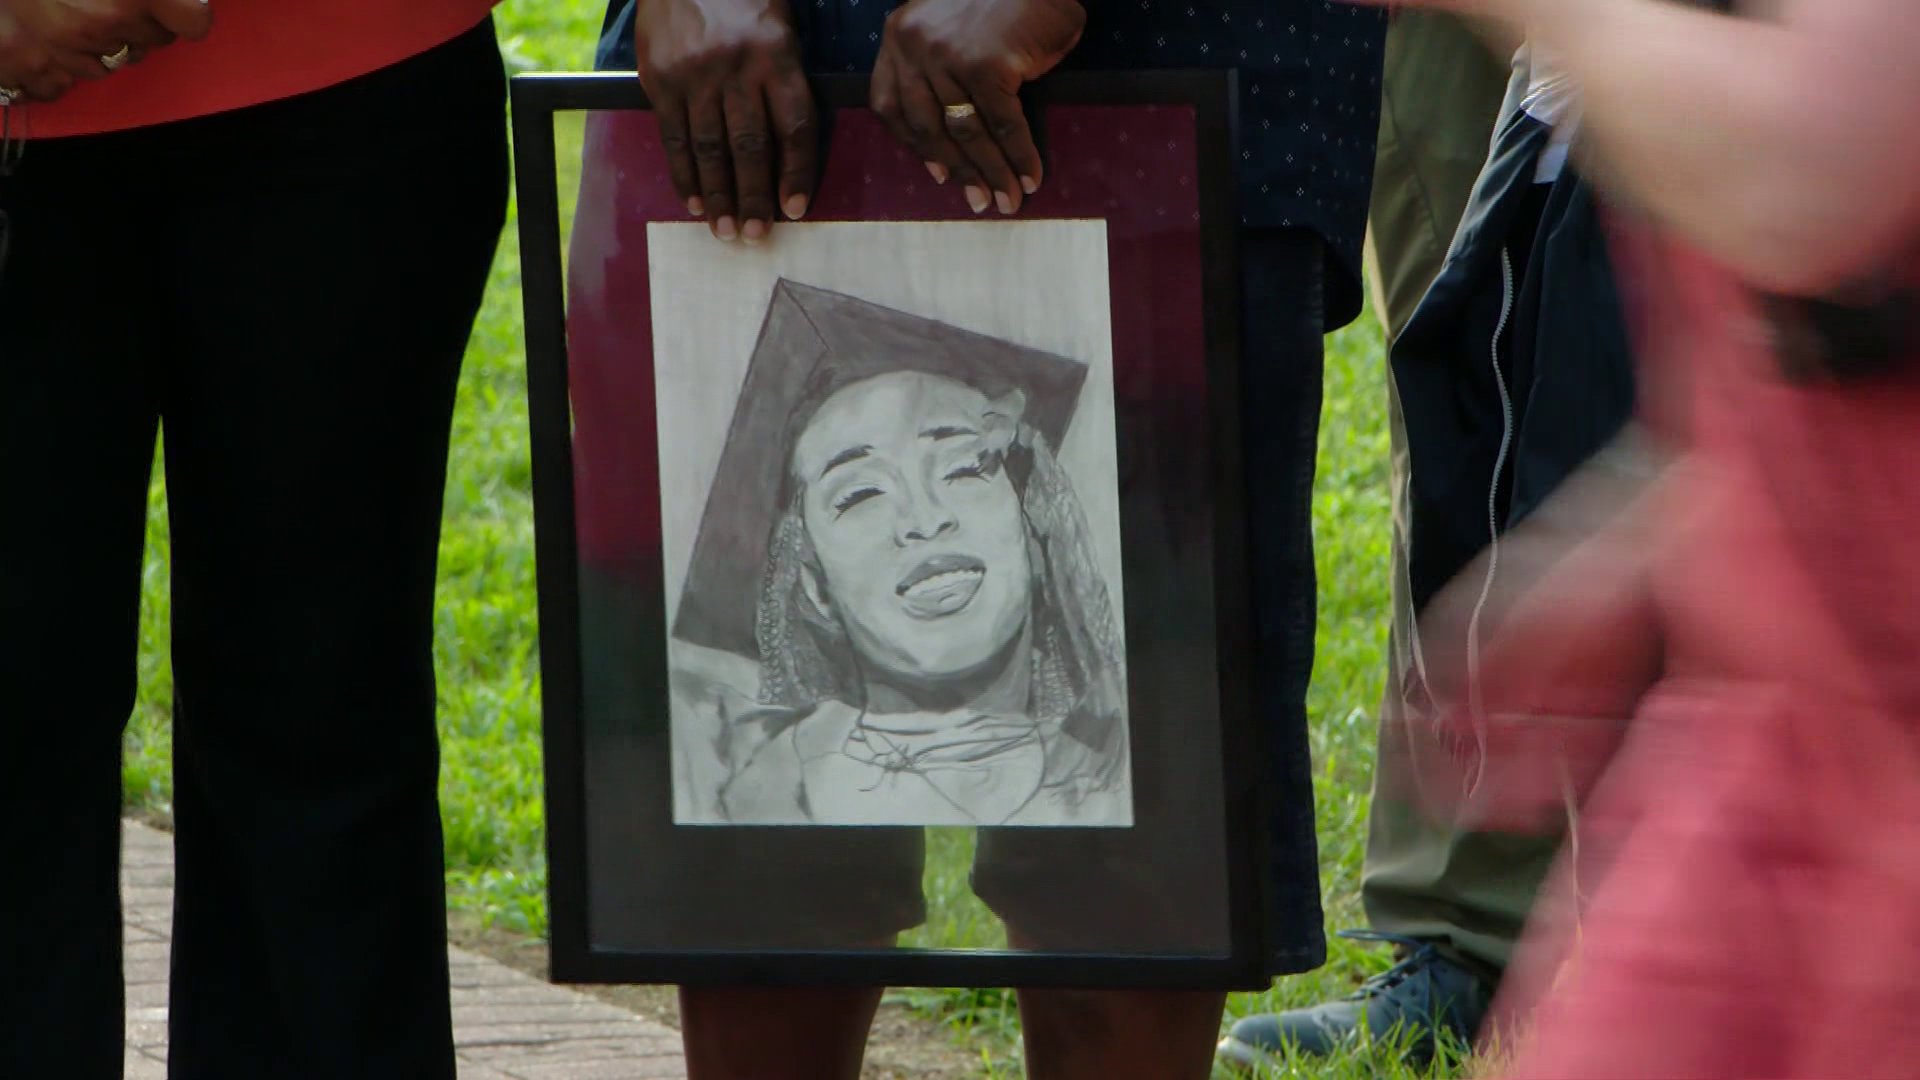 Rally held for missing Ole Miss student Jimmie “Jay” Lee